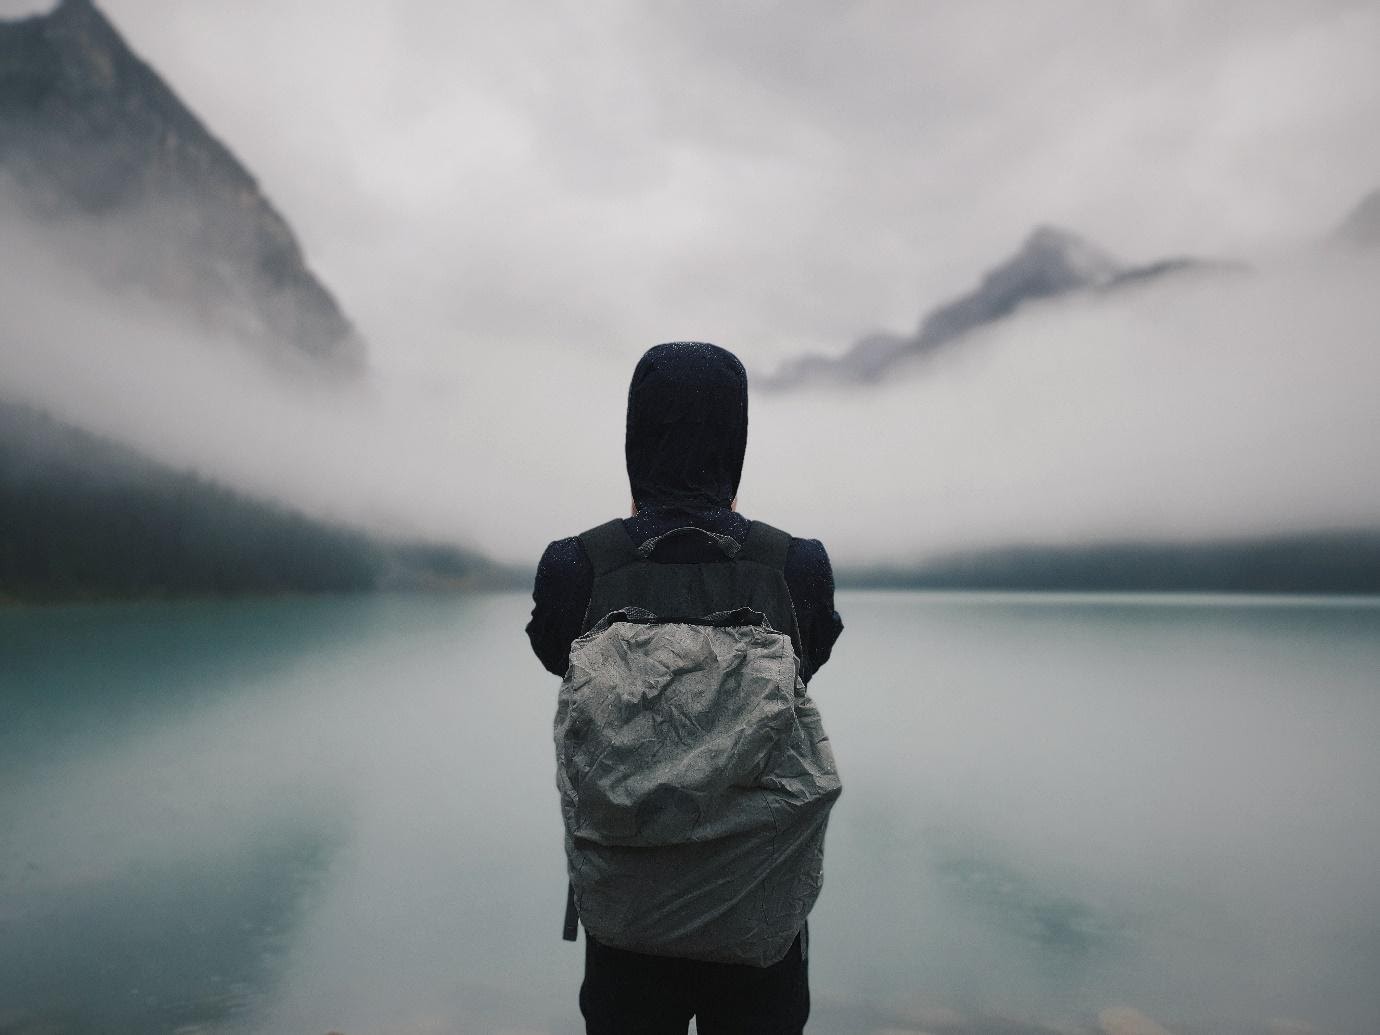 A person standing in a black hoodie with a backpack on staring out into a foggy nature environment